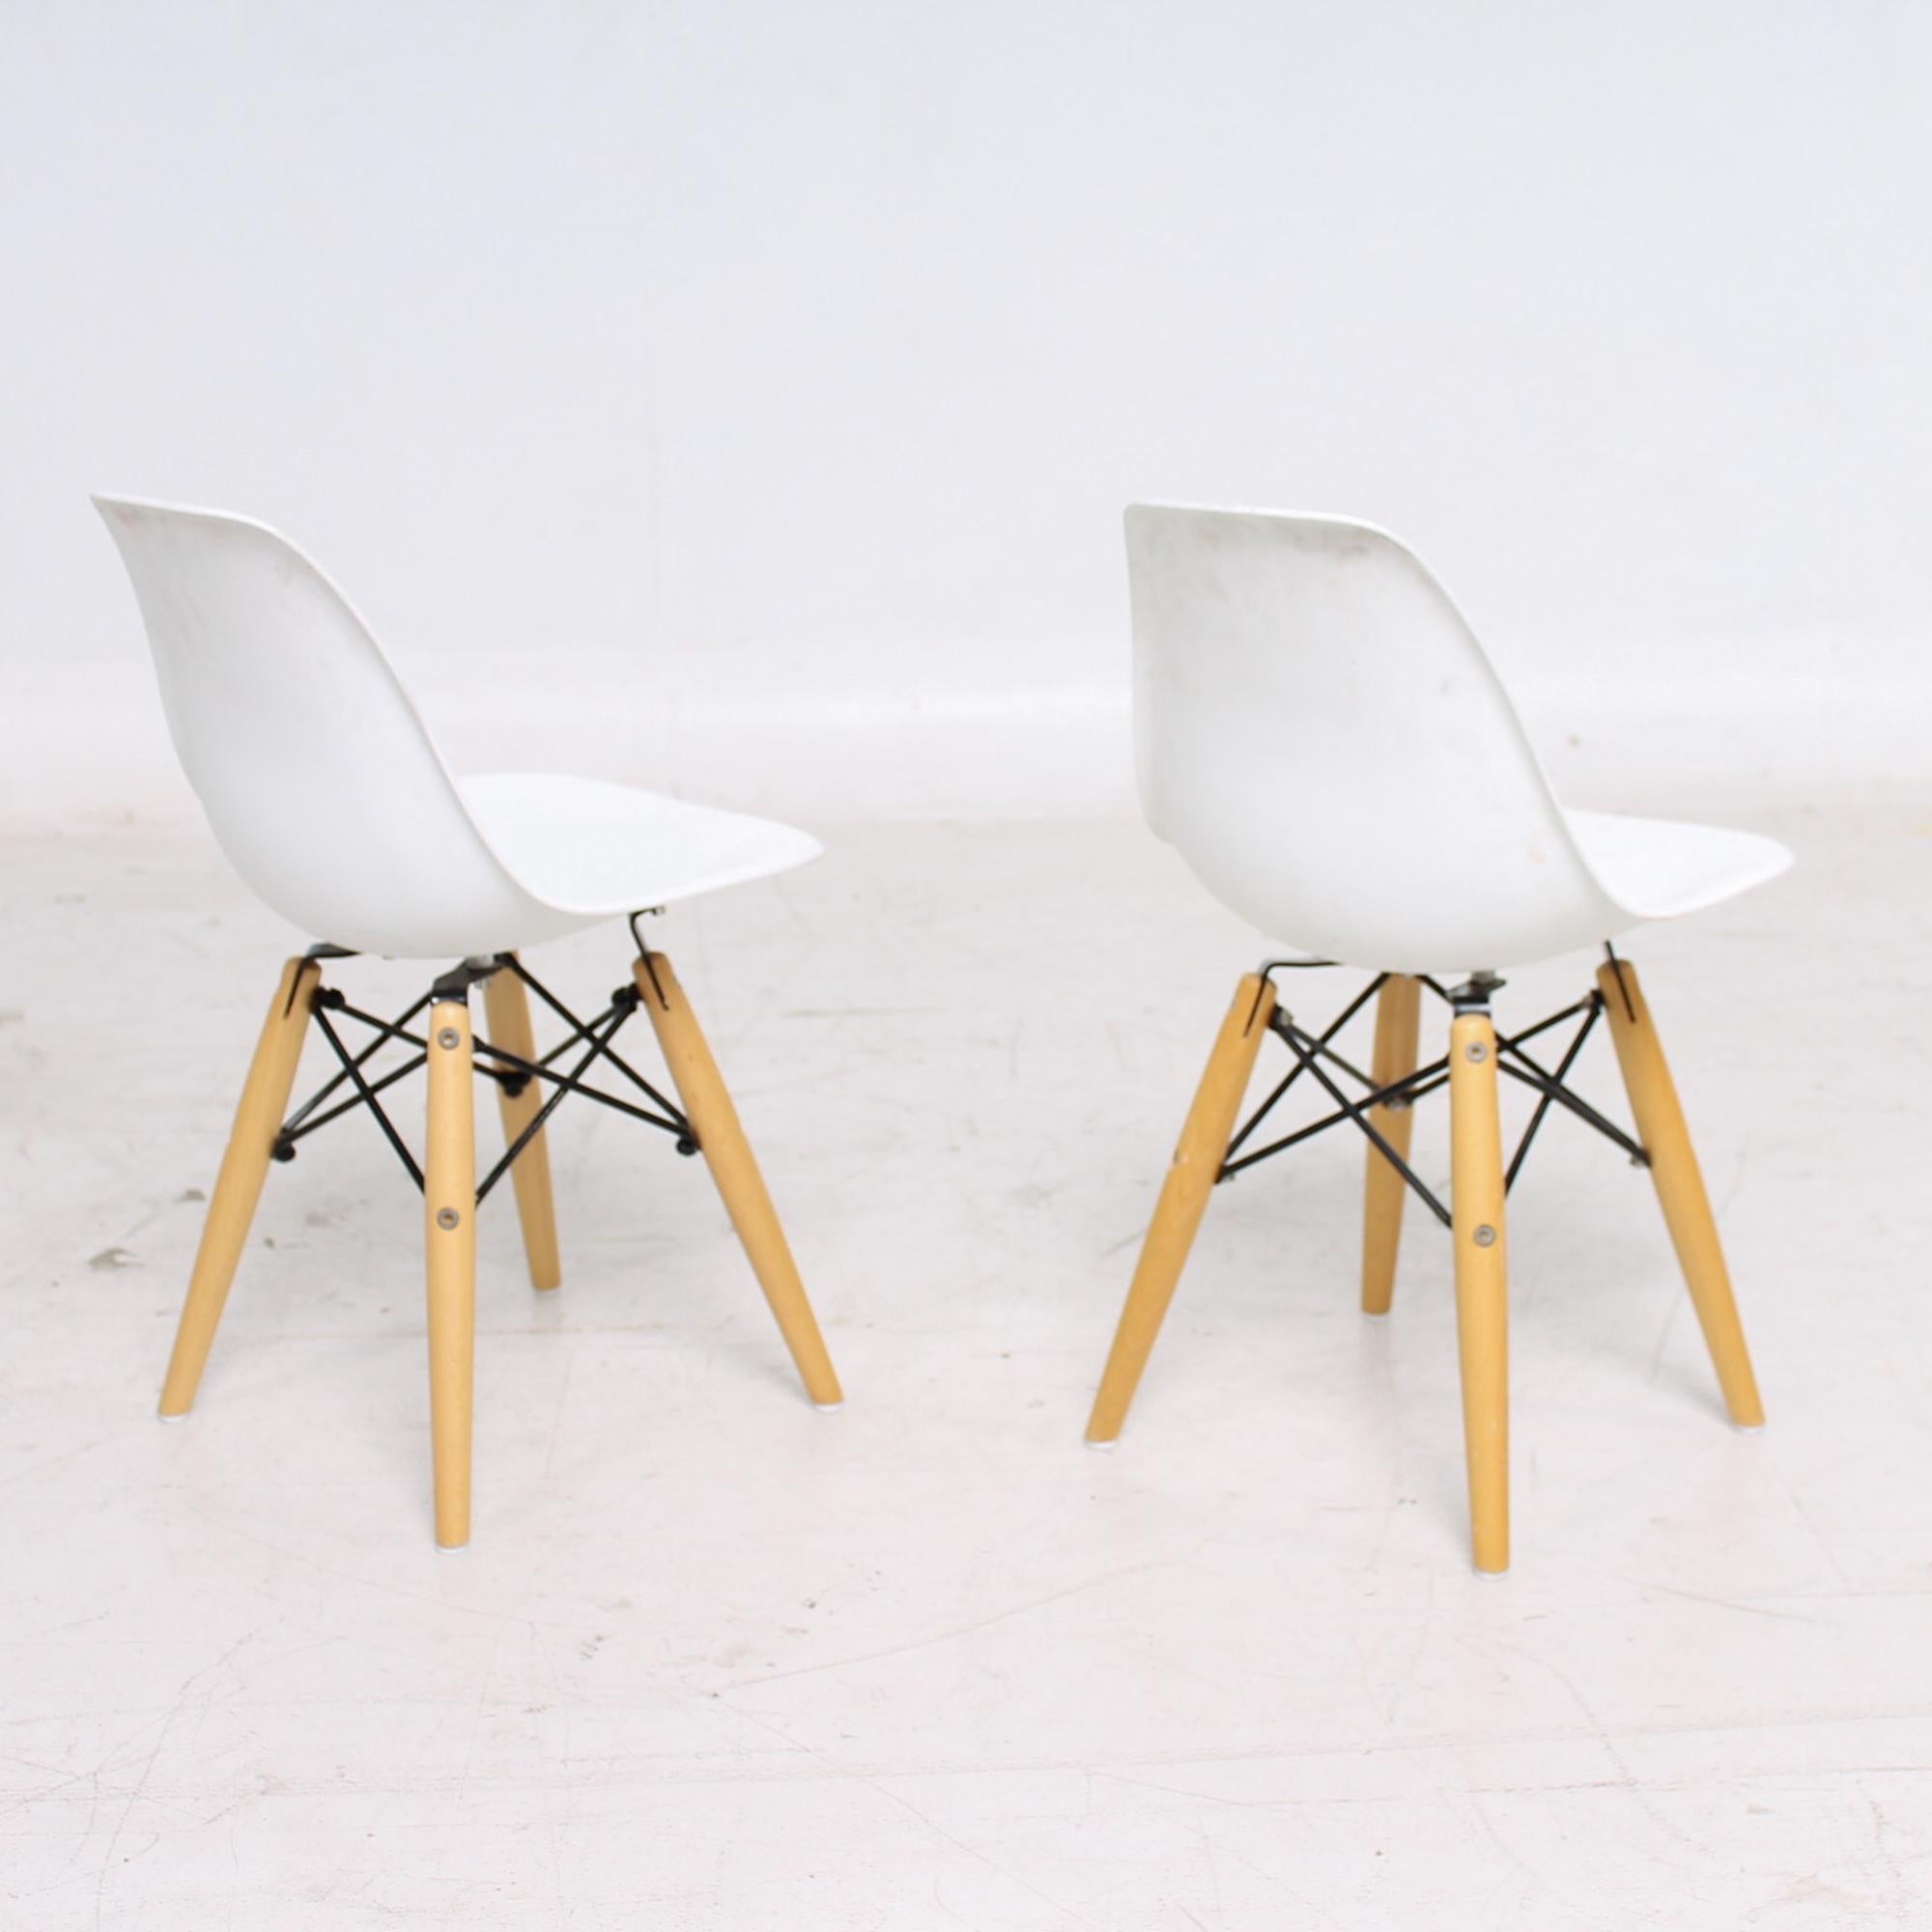 Eames Childrens Chair - 2 For Sale on 1stDibs